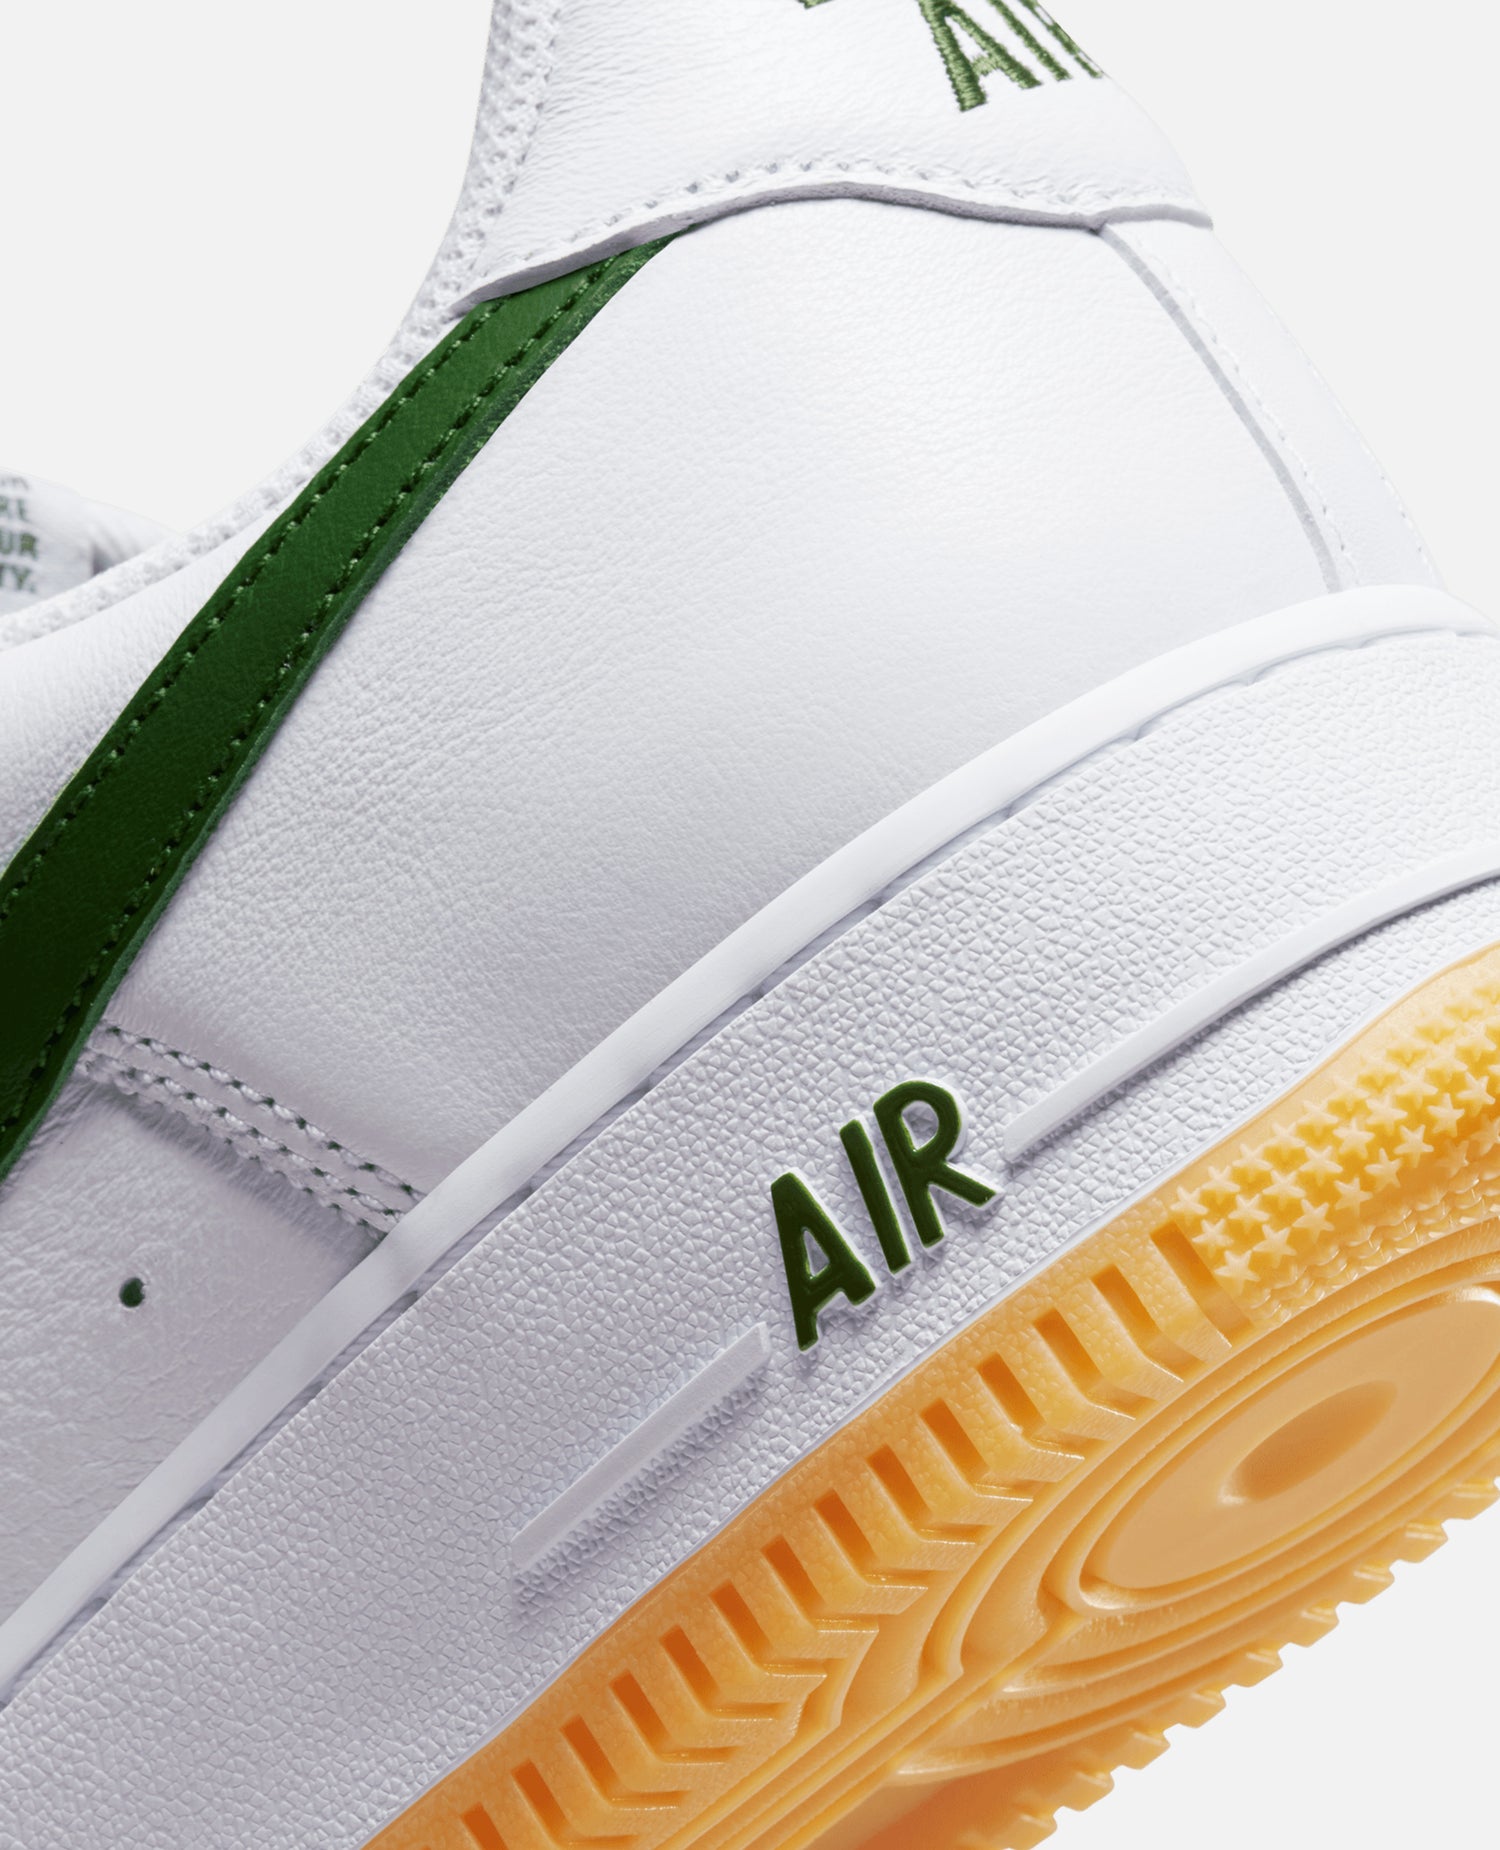 Nike Air Force 1 Low Retro (White/Forest Green-Gum Yellow)